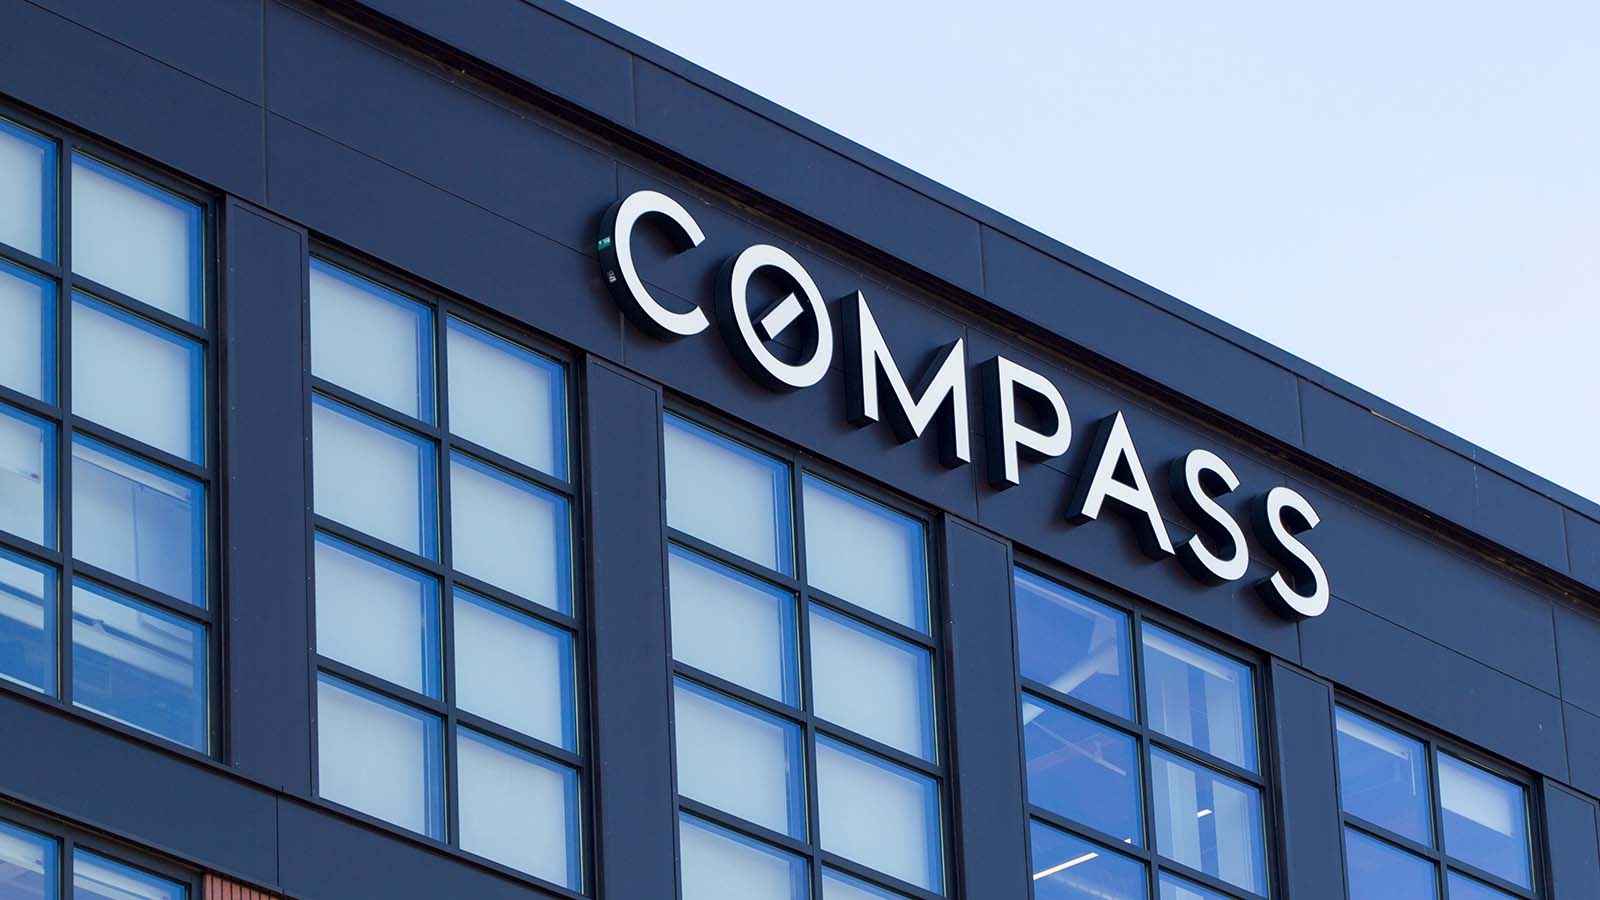 The Compass (COMP Stock) office in Seattle, Washington.